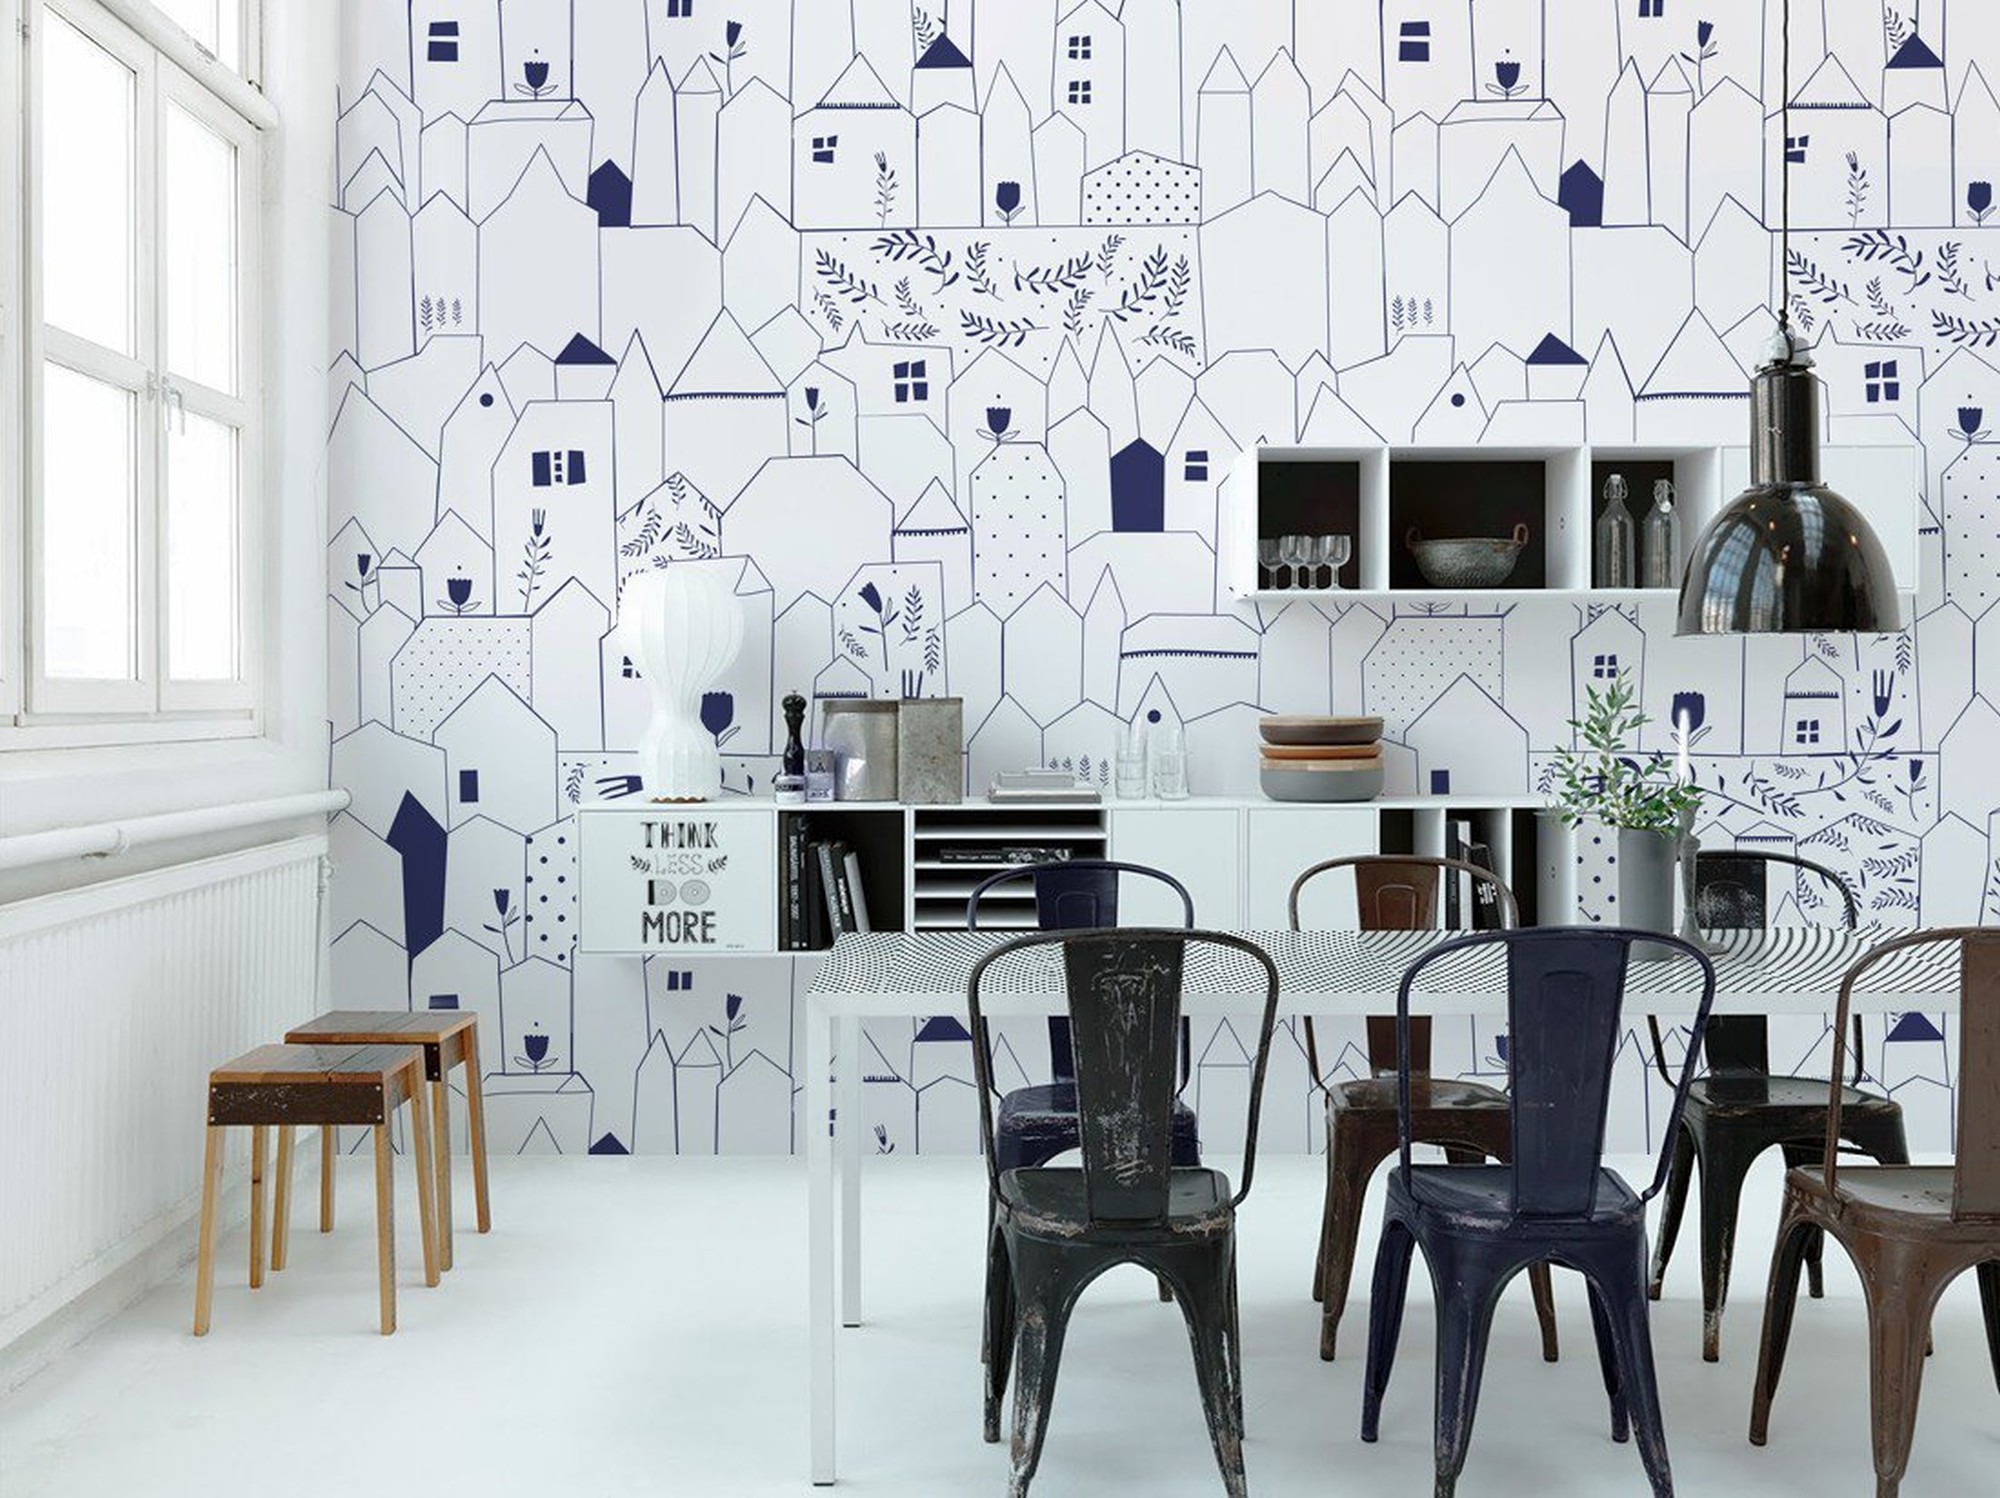 Subtle Patterns • Dining room - Scandinavian - Abstraction - Art & lifestyle - Wall Murals - Stickers